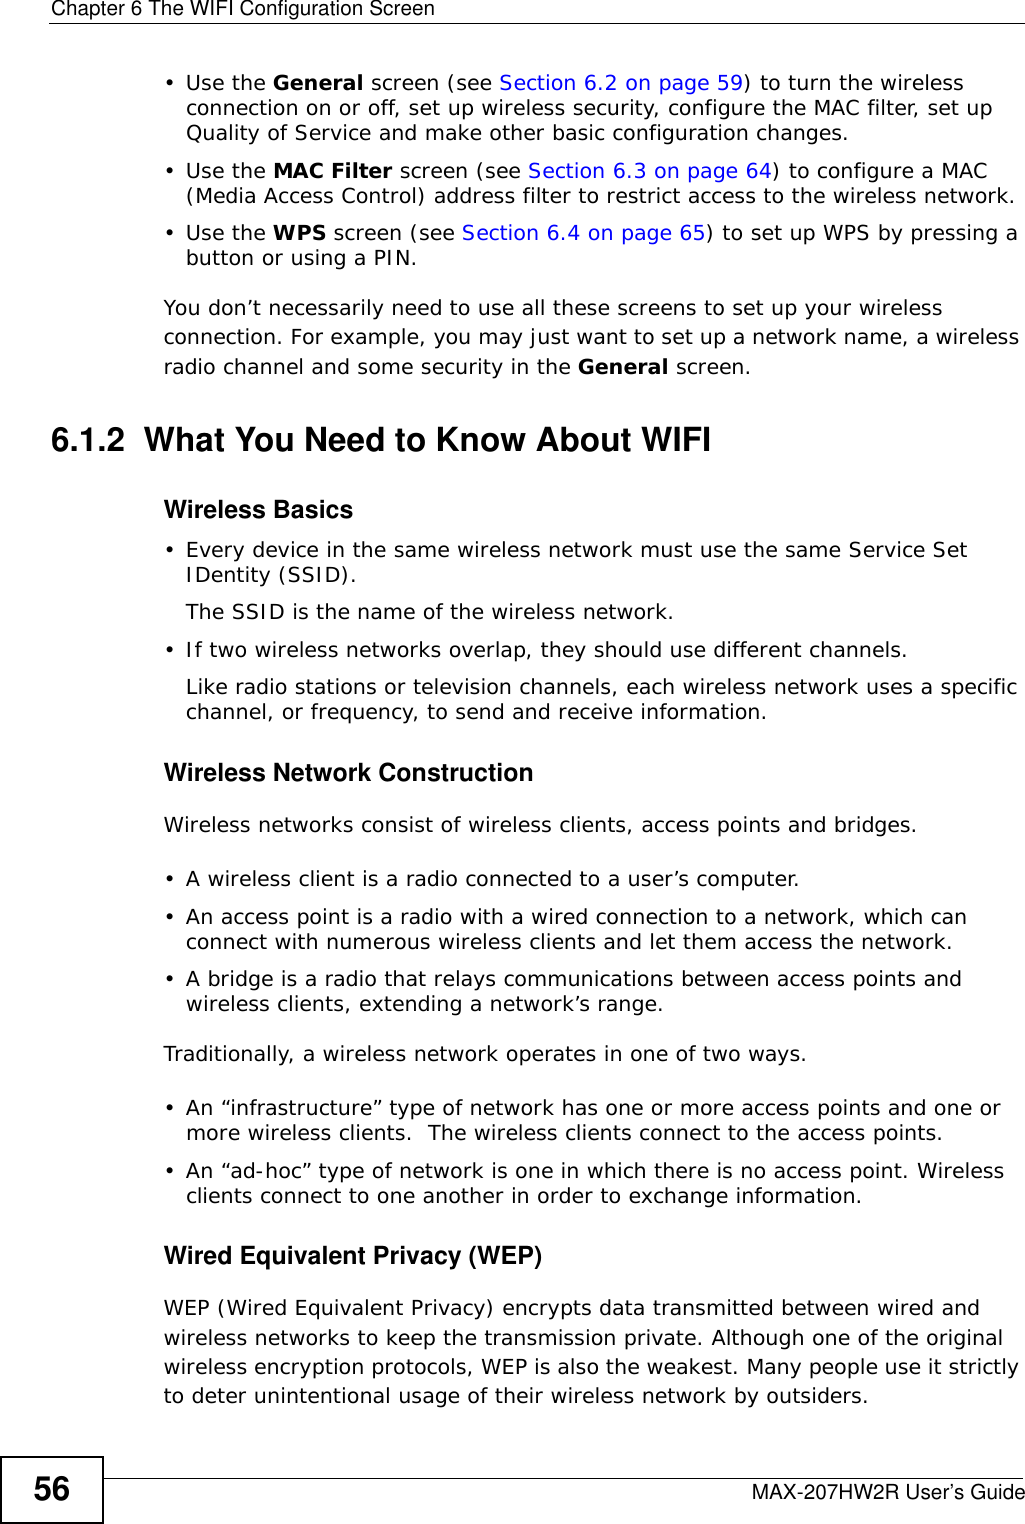 Chapter 6 The WIFI Configuration ScreenMAX-207HW2R User’s Guide56•Use the General screen (see Section 6.2 on page 59) to turn the wireless connection on or off, set up wireless security, configure the MAC filter, set up Quality of Service and make other basic configuration changes.•Use the MAC Filter screen (see Section 6.3 on page 64) to configure a MAC (Media Access Control) address filter to restrict access to the wireless network.•Use the WPS screen (see Section 6.4 on page 65) to set up WPS by pressing a button or using a PIN.You don’t necessarily need to use all these screens to set up your wireless connection. For example, you may just want to set up a network name, a wireless radio channel and some security in the General screen.6.1.2  What You Need to Know About WIFIWireless Basics• Every device in the same wireless network must use the same Service Set IDentity (SSID).The SSID is the name of the wireless network.• If two wireless networks overlap, they should use different channels.Like radio stations or television channels, each wireless network uses a specific channel, or frequency, to send and receive information.Wireless Network ConstructionWireless networks consist of wireless clients, access points and bridges. • A wireless client is a radio connected to a user’s computer. • An access point is a radio with a wired connection to a network, which can connect with numerous wireless clients and let them access the network. • A bridge is a radio that relays communications between access points and wireless clients, extending a network’s range. Traditionally, a wireless network operates in one of two ways.• An “infrastructure” type of network has one or more access points and one or more wireless clients.  The wireless clients connect to the access points.• An “ad-hoc” type of network is one in which there is no access point. Wireless clients connect to one another in order to exchange information.Wired Equivalent Privacy (WEP)WEP (Wired Equivalent Privacy) encrypts data transmitted between wired and wireless networks to keep the transmission private. Although one of the original wireless encryption protocols, WEP is also the weakest. Many people use it strictly to deter unintentional usage of their wireless network by outsiders.